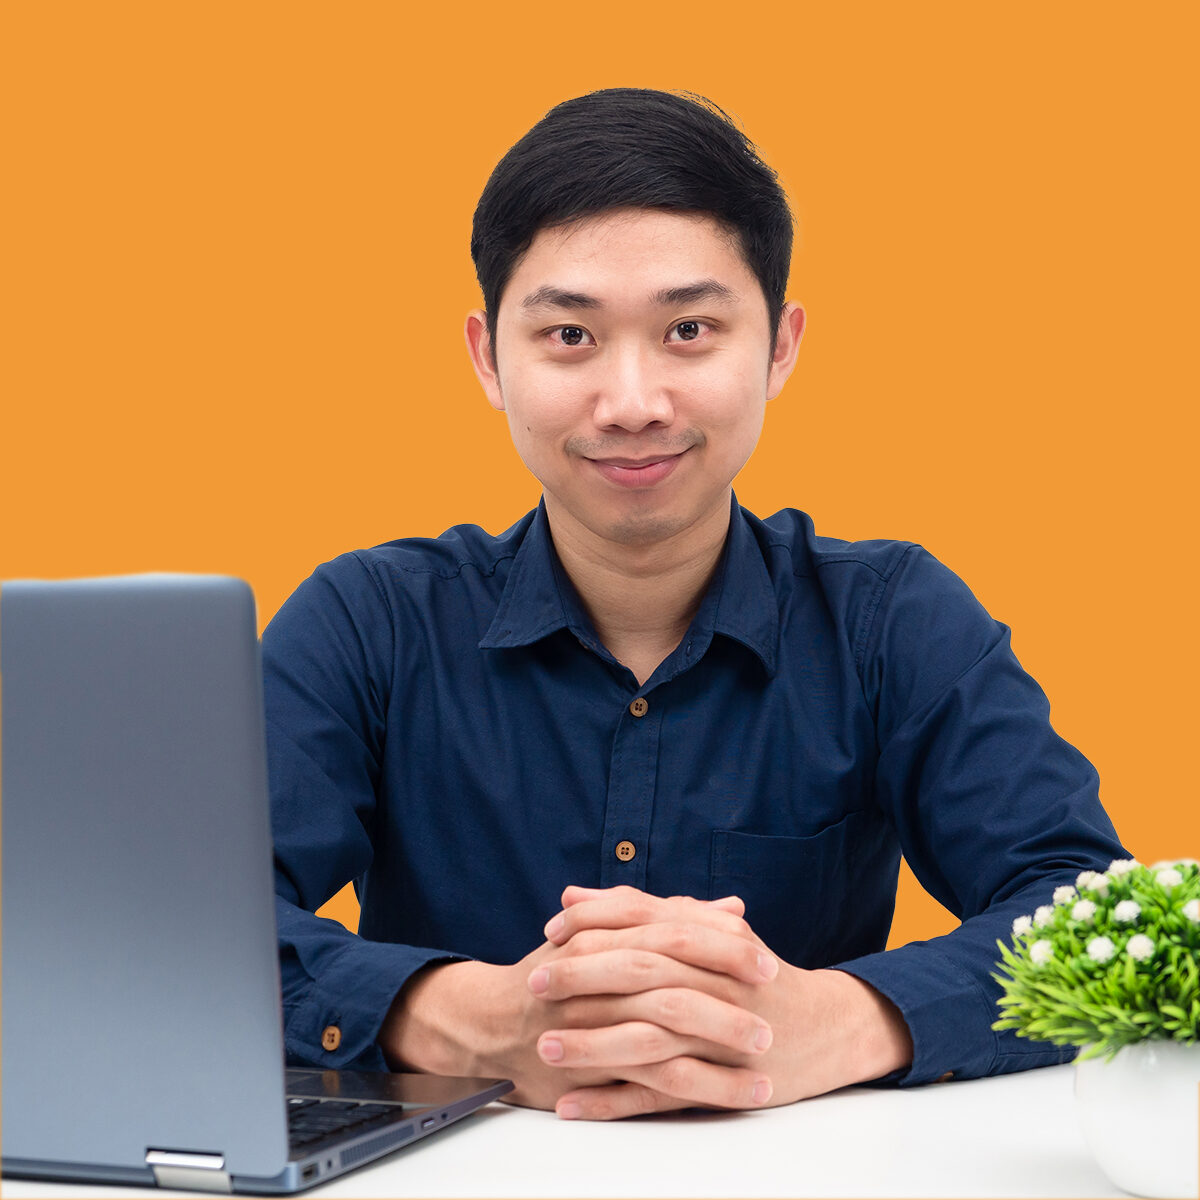 Young Asian man looking confident sitting at the table with laptop workplace